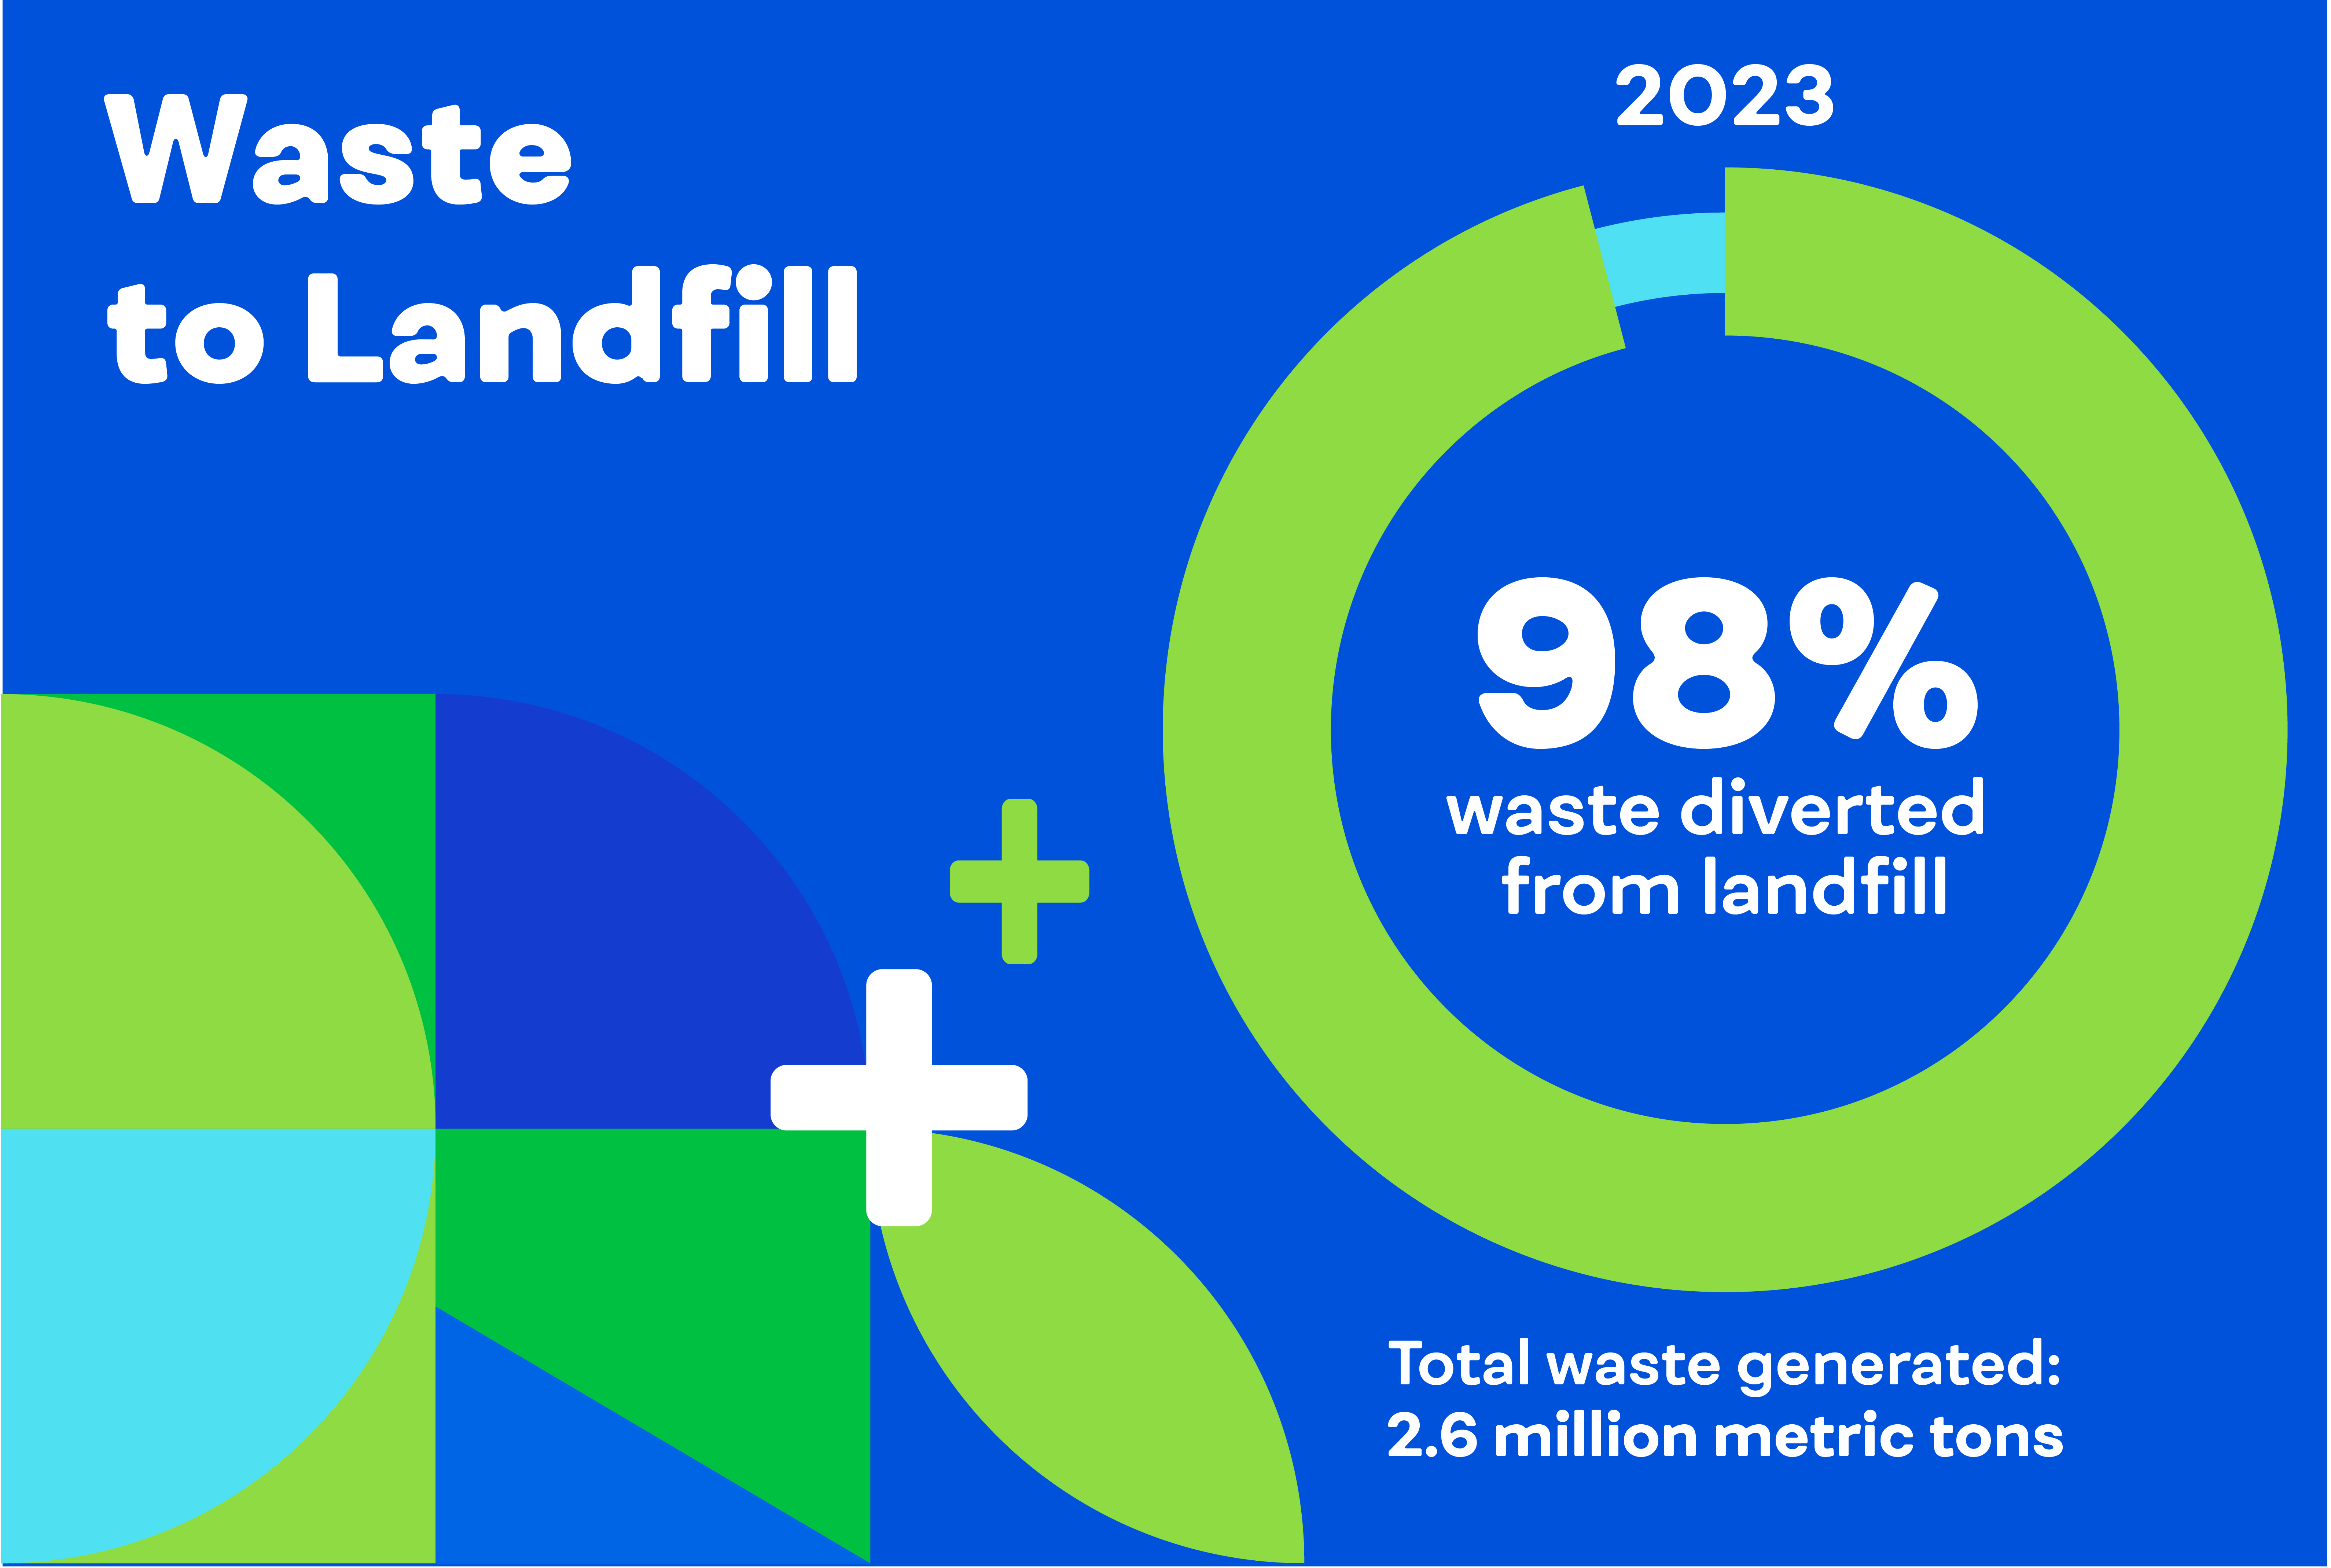 2023 Waste performance: 2.6 million tons generated, 98% diverted from landfill